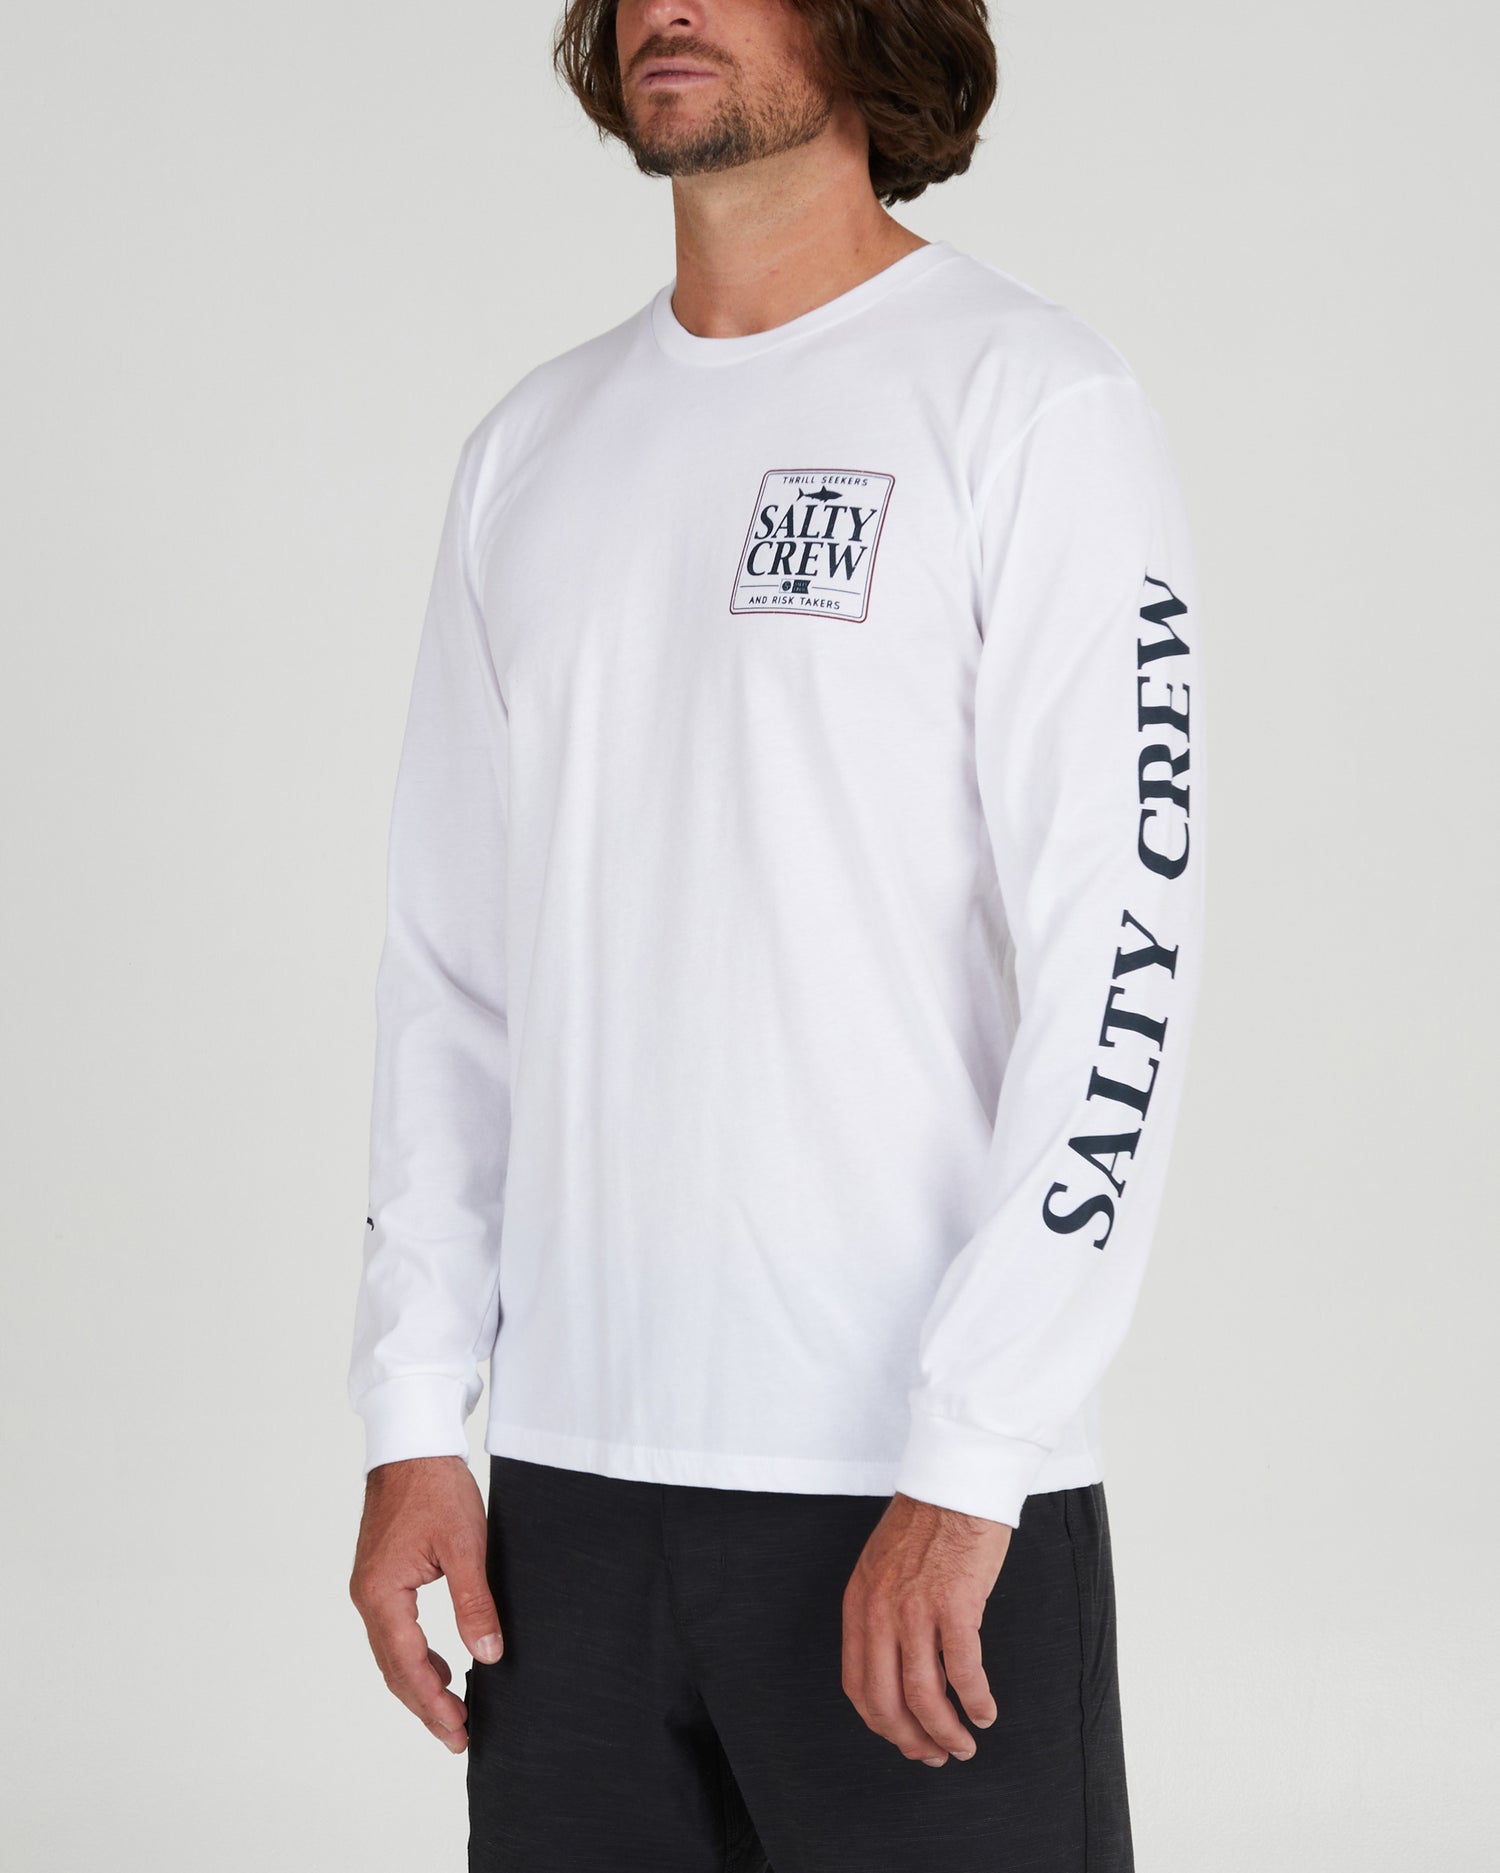 On body front angle of the Coaster White L/S Premium Tee